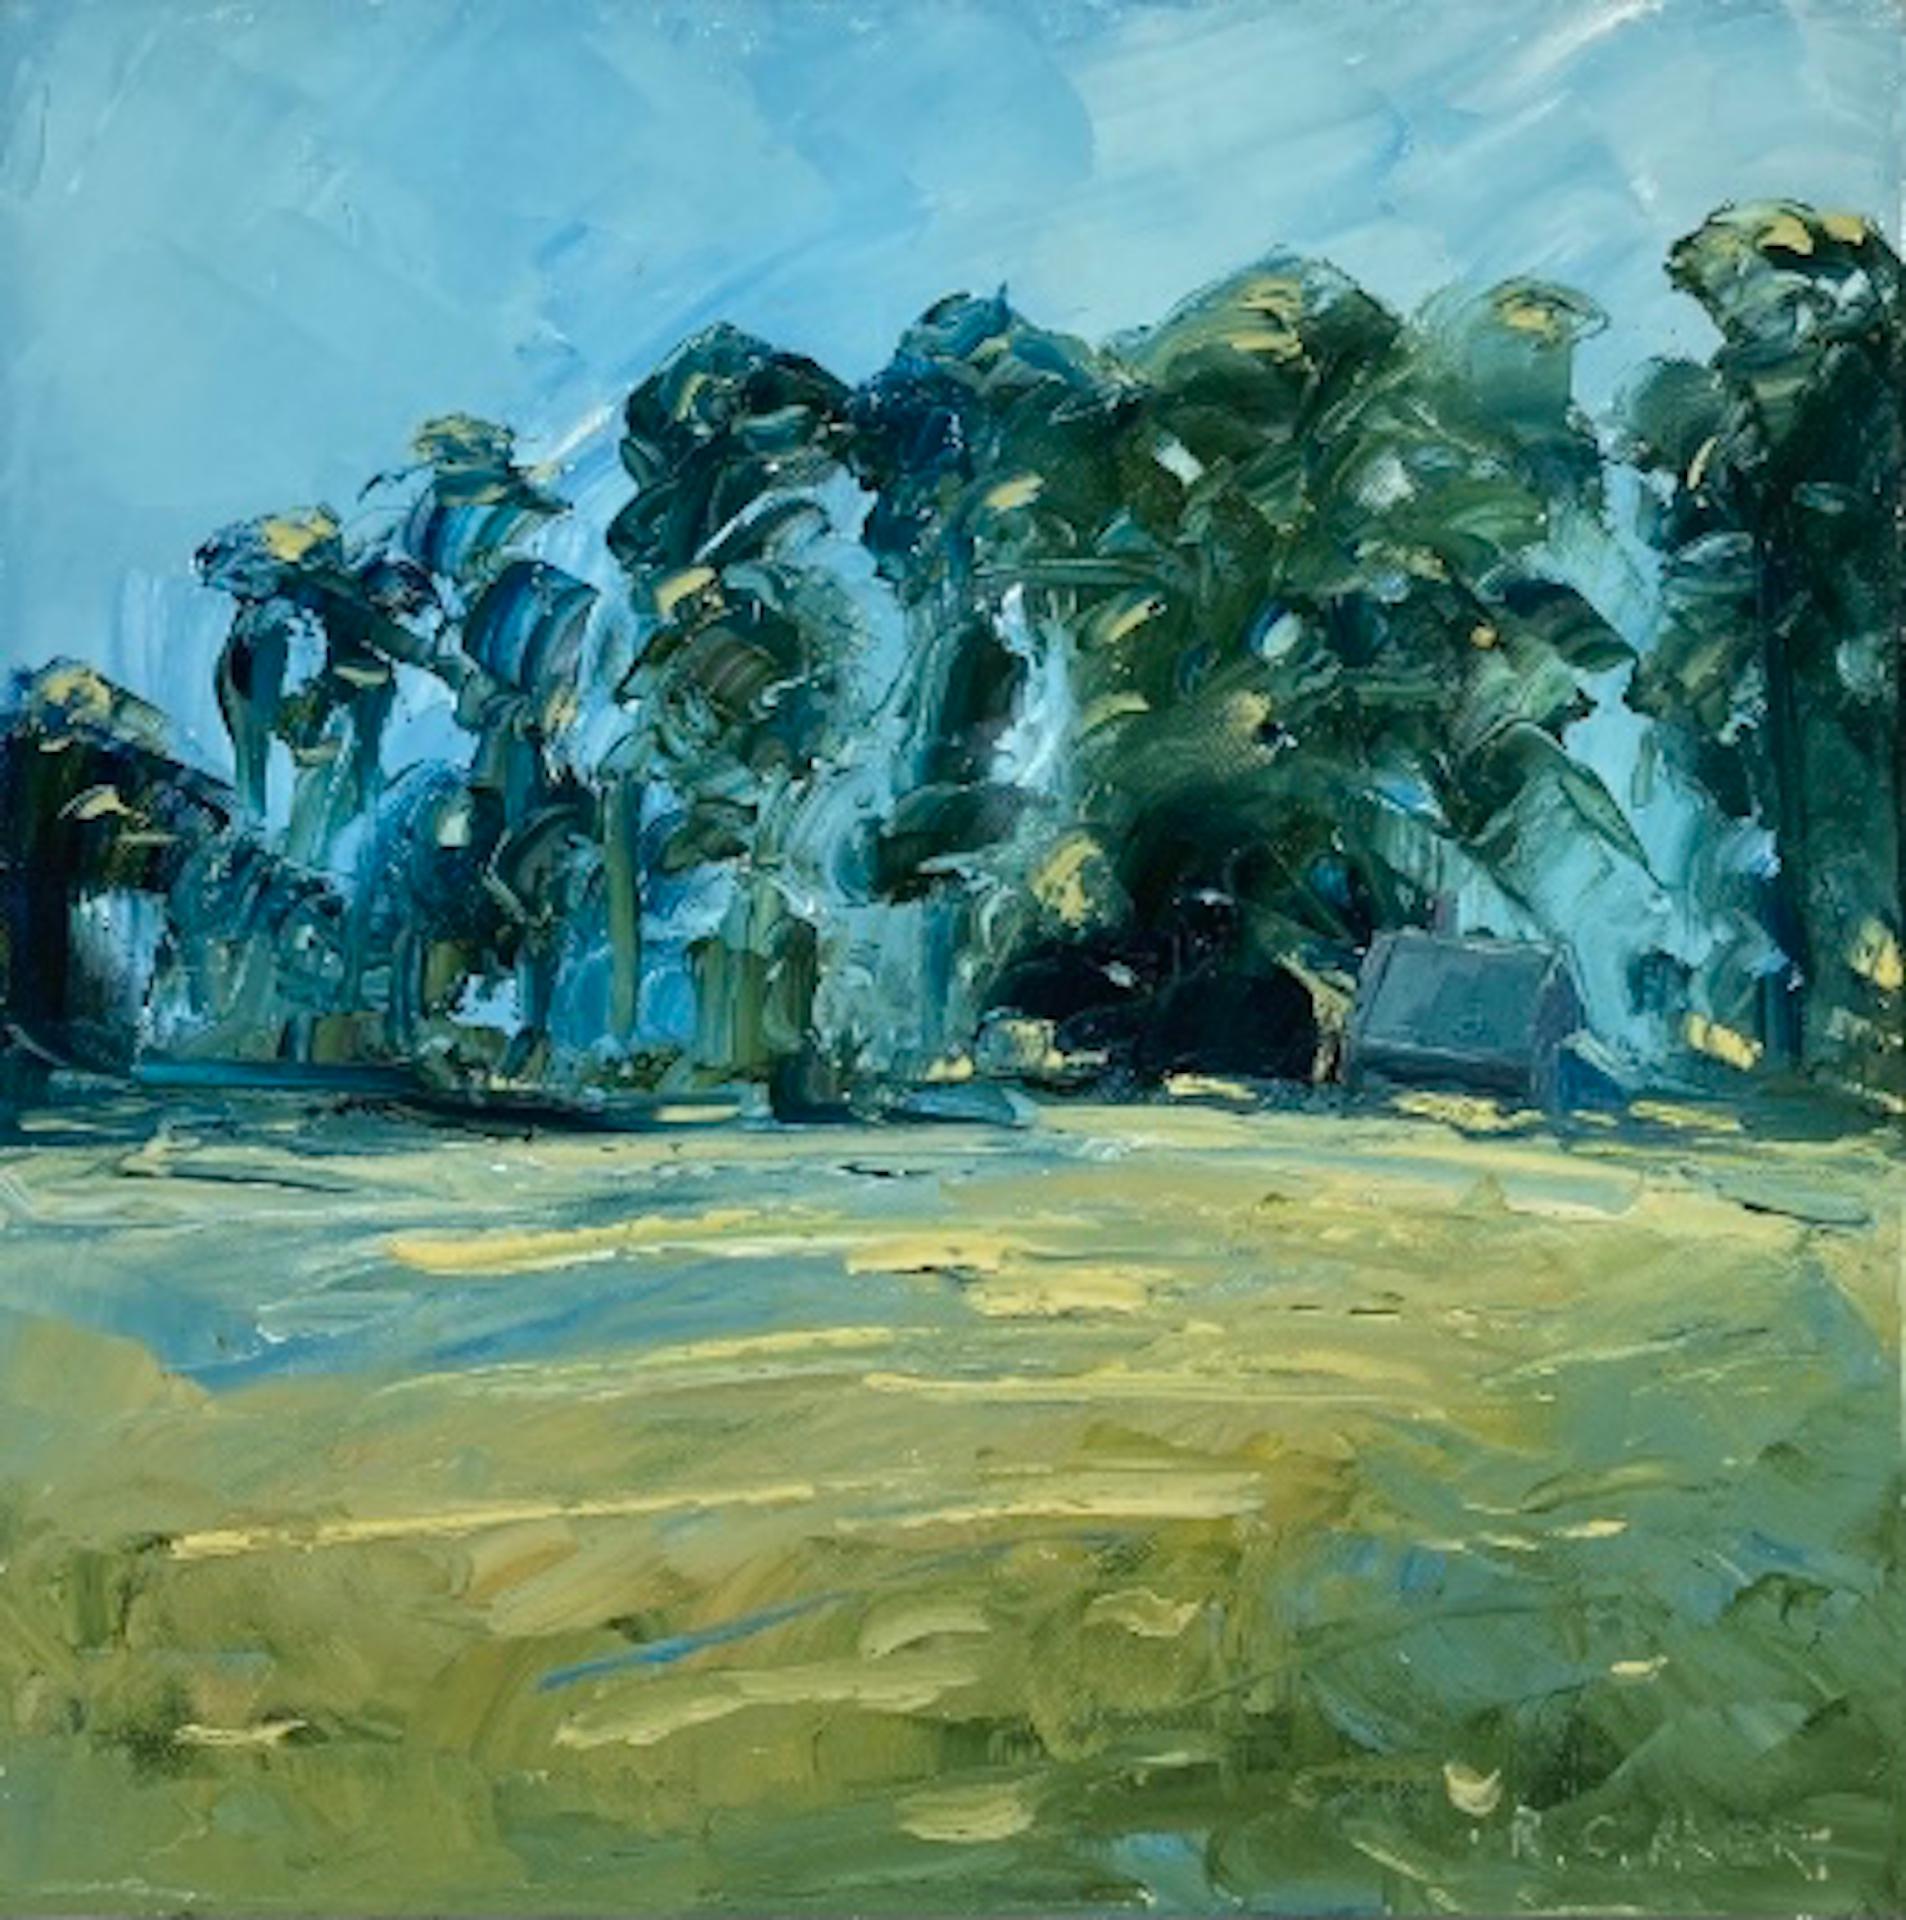 Great Tew, Summer [2020]
Original
Landscape
Oil paint on canvas
Image size: H:40 cm x W:40 cm
Complete Size of Unframed Work: H:40 cm x W:40 cm x D:2cm
Frame Size: H:43 cm x W:43 cm x D:3.5cm
Sold Framed
Please note that insitu images are purely an